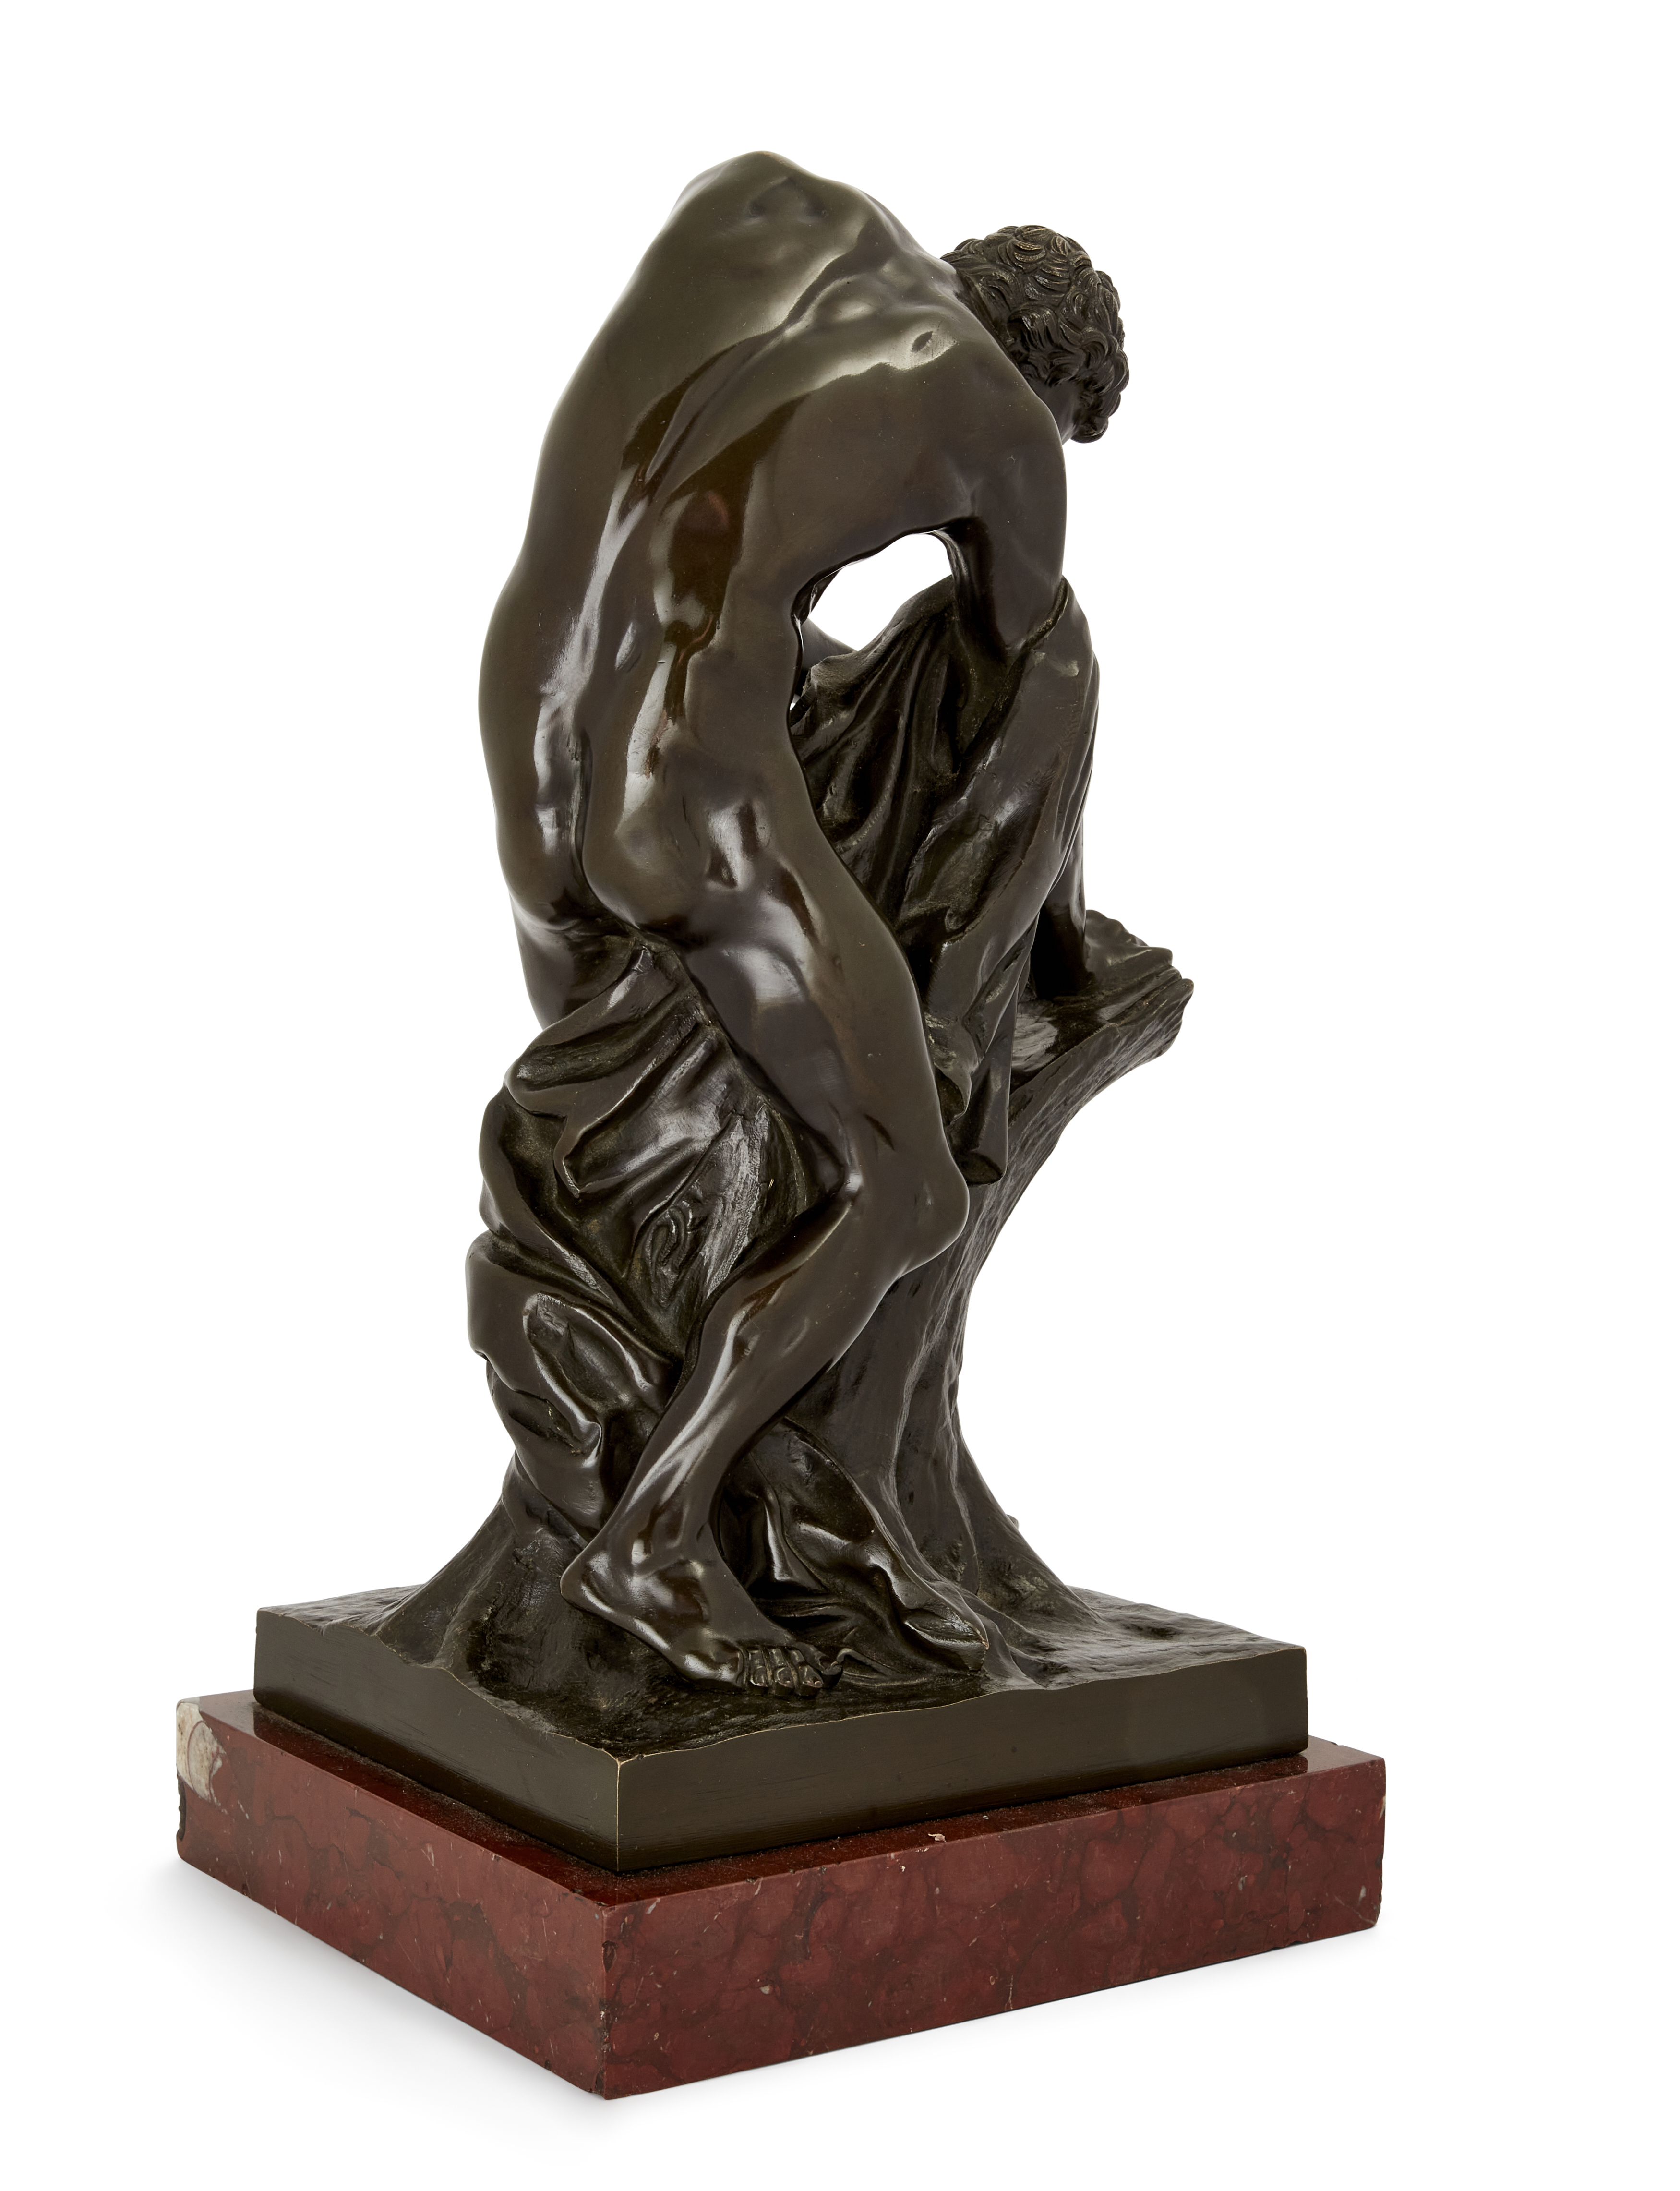 After Edme Dumont, French, 1761-1844, a French bronze model of Milo of Croton, Mid-19th century, ... - Image 3 of 3